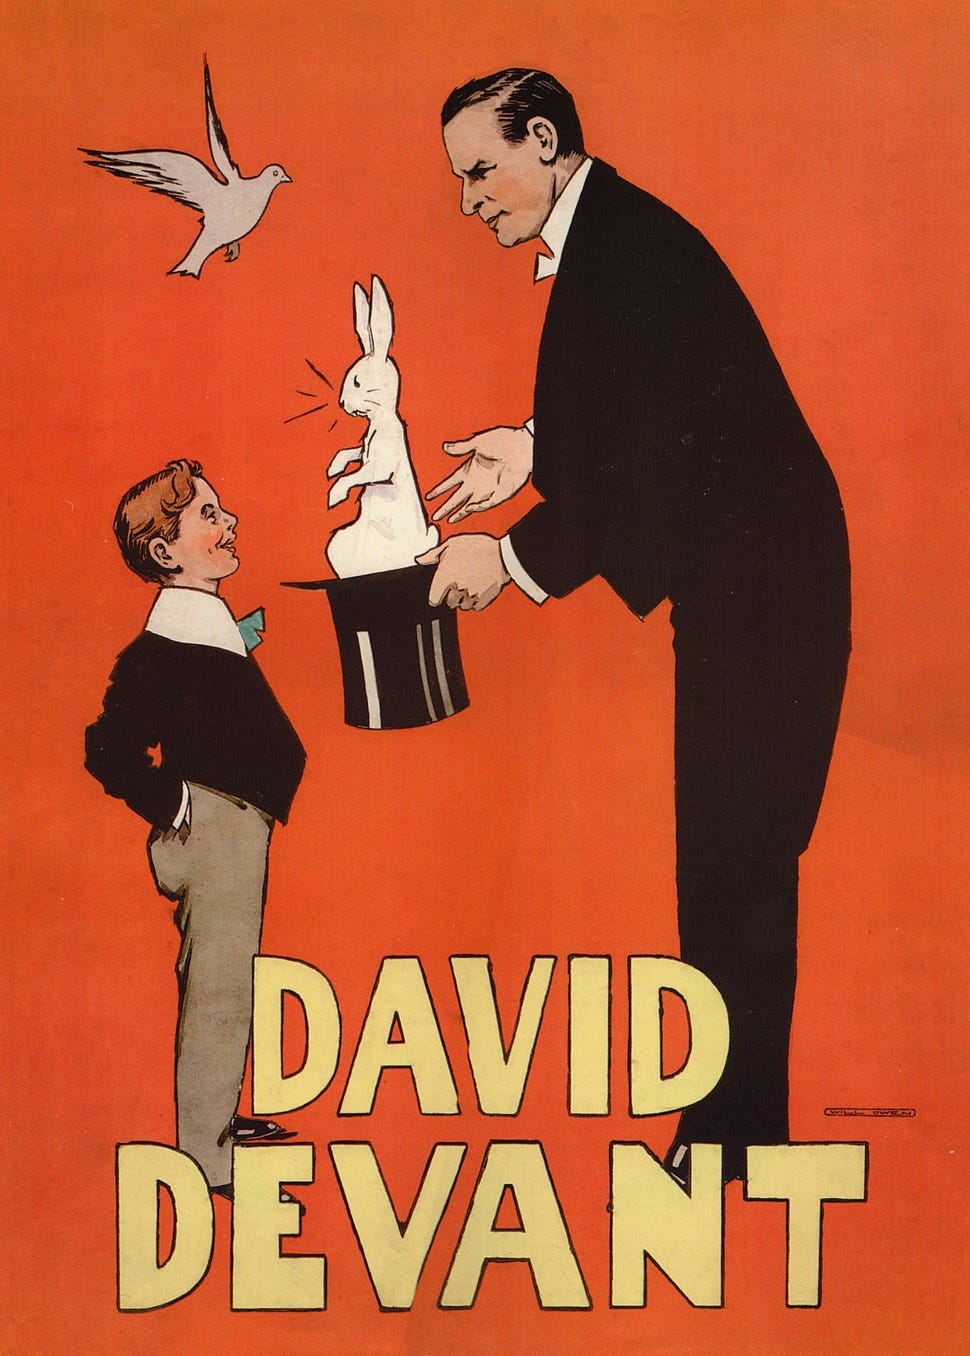 A magic poster showing a magician producing a rabbit out of a top hat in front of a young boy.